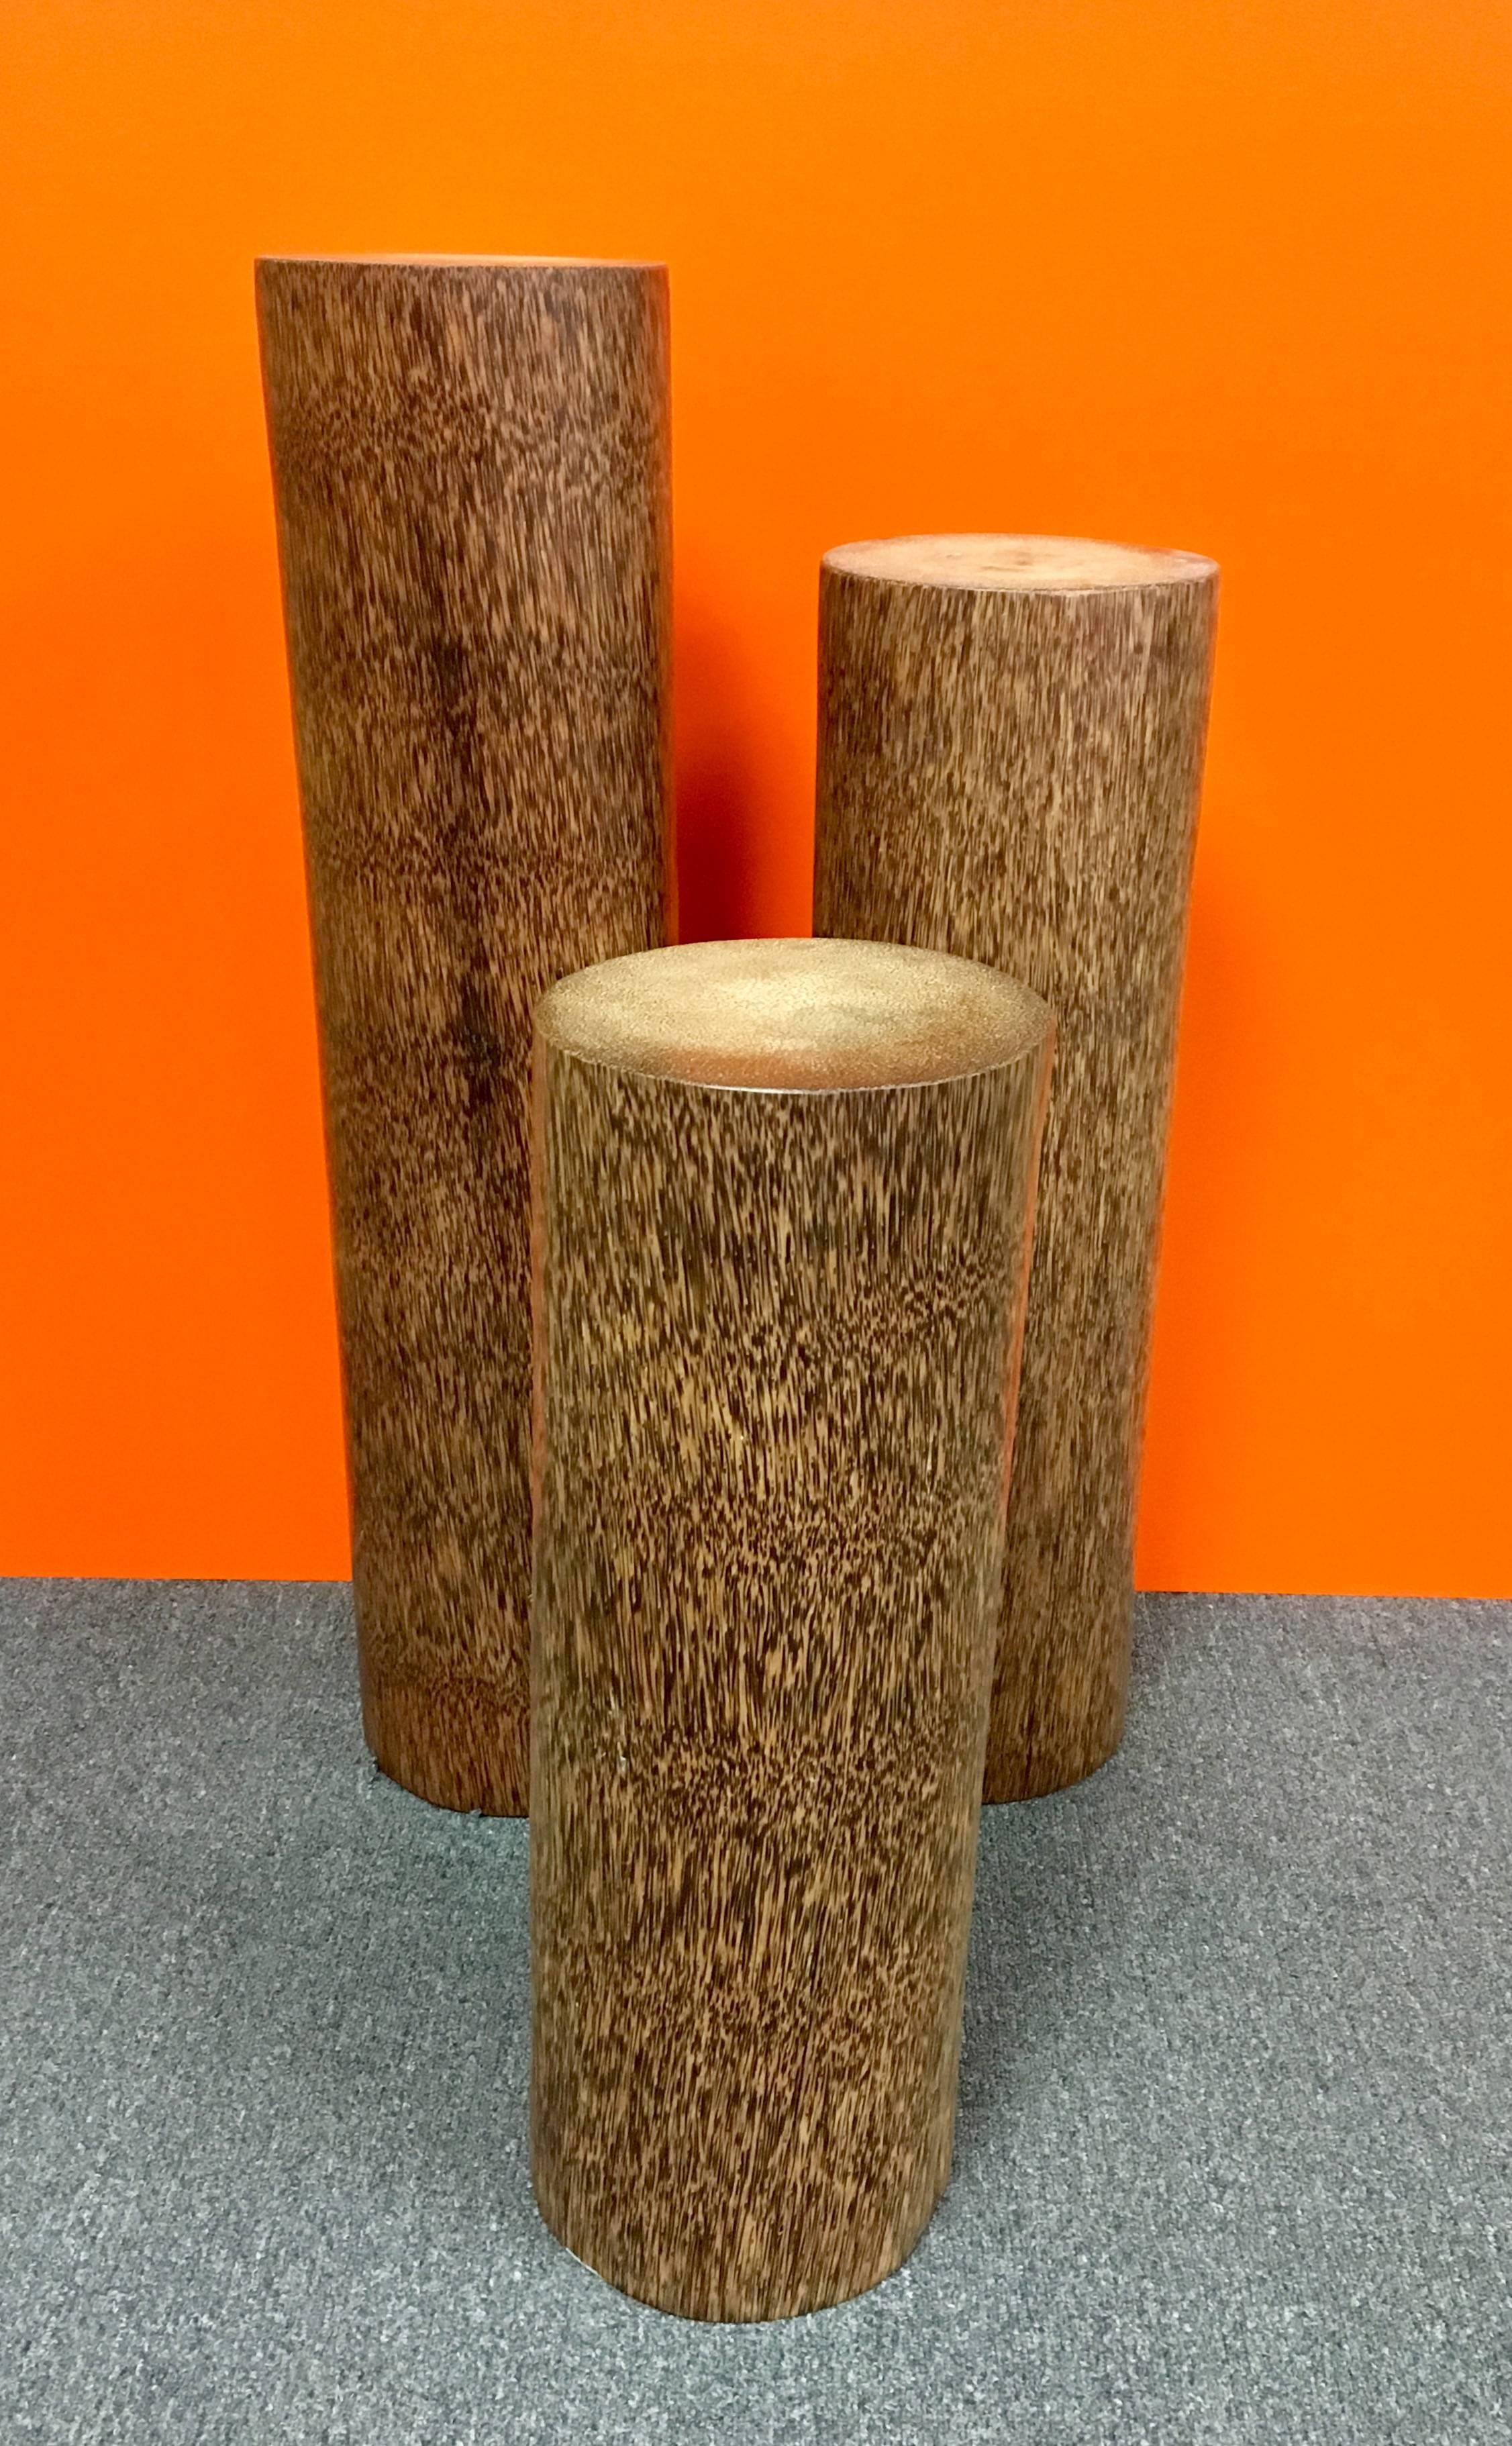 Unique set of pedestals made of solid coconut / palm wood from the trunk of the tree. Nicely finished with a great wood grain pattern; the pedestals are very heavy and solid. The tallest pedestal is 37 1/2